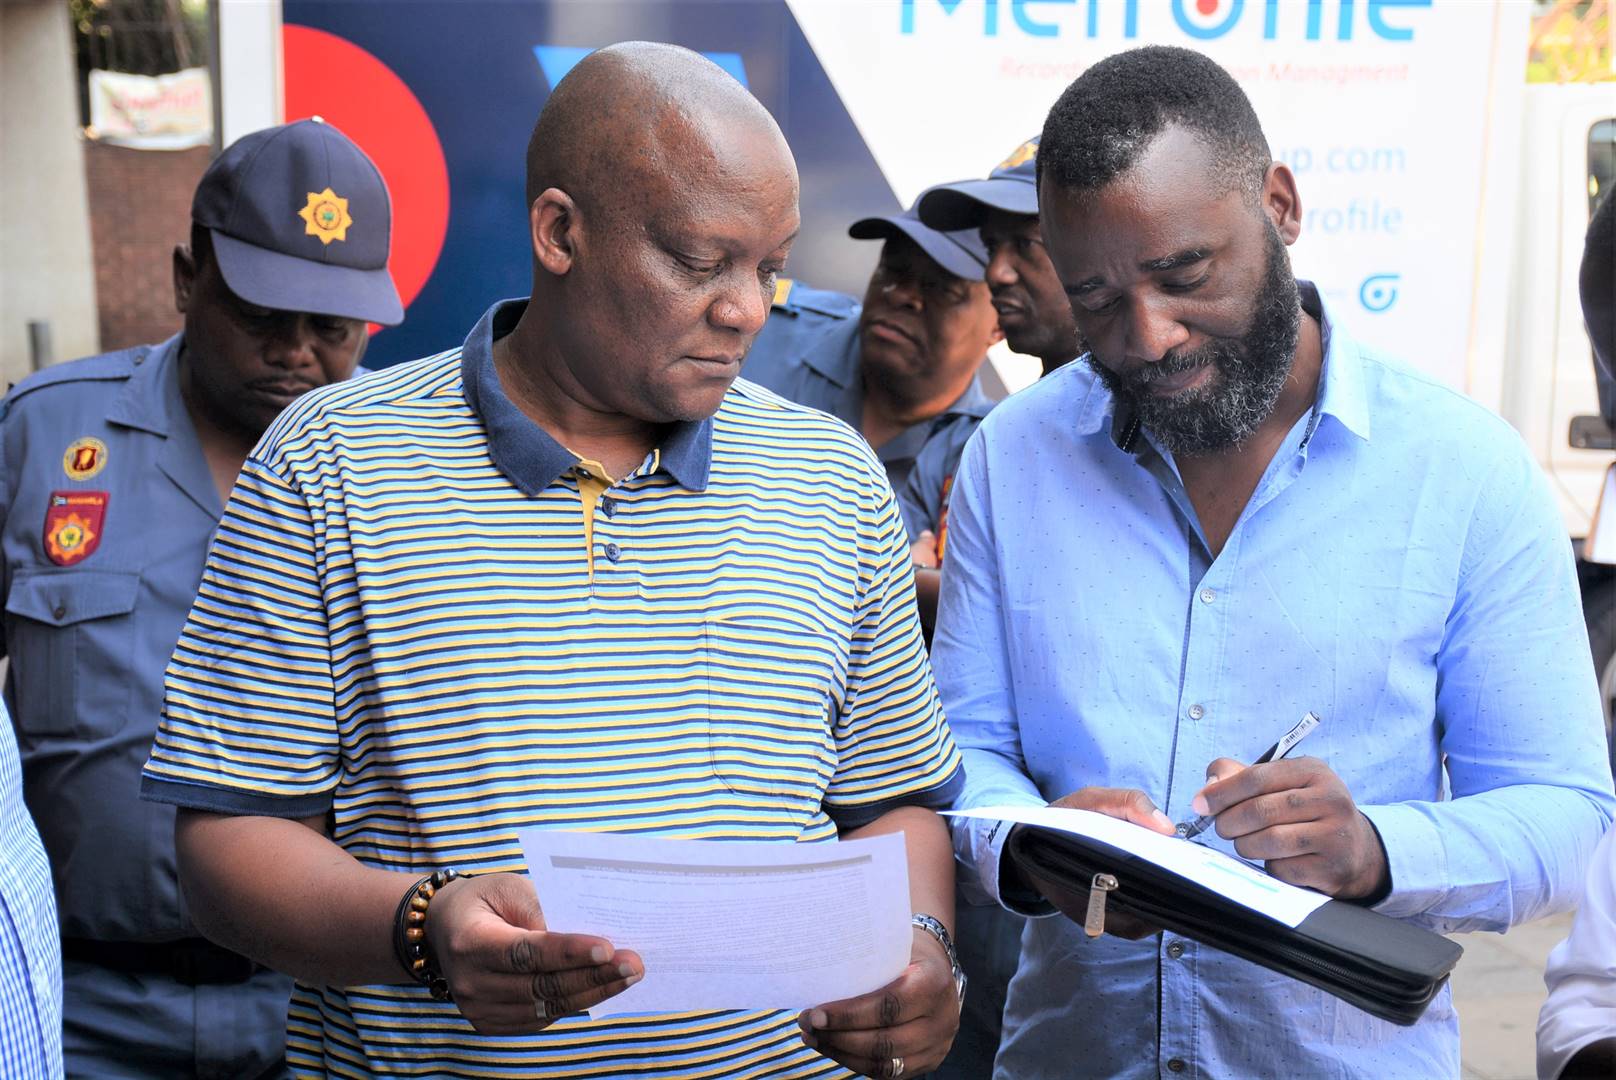 Castro Musinyai (Right) convener of march against parental Alienation Syndrome and child abuse hand over the memorandum of demands to Musa Mbongwe (Left-T-shirt) from the office of the Deputy Minister of Justice and Constitutional Development. Photo by Raymond Morare